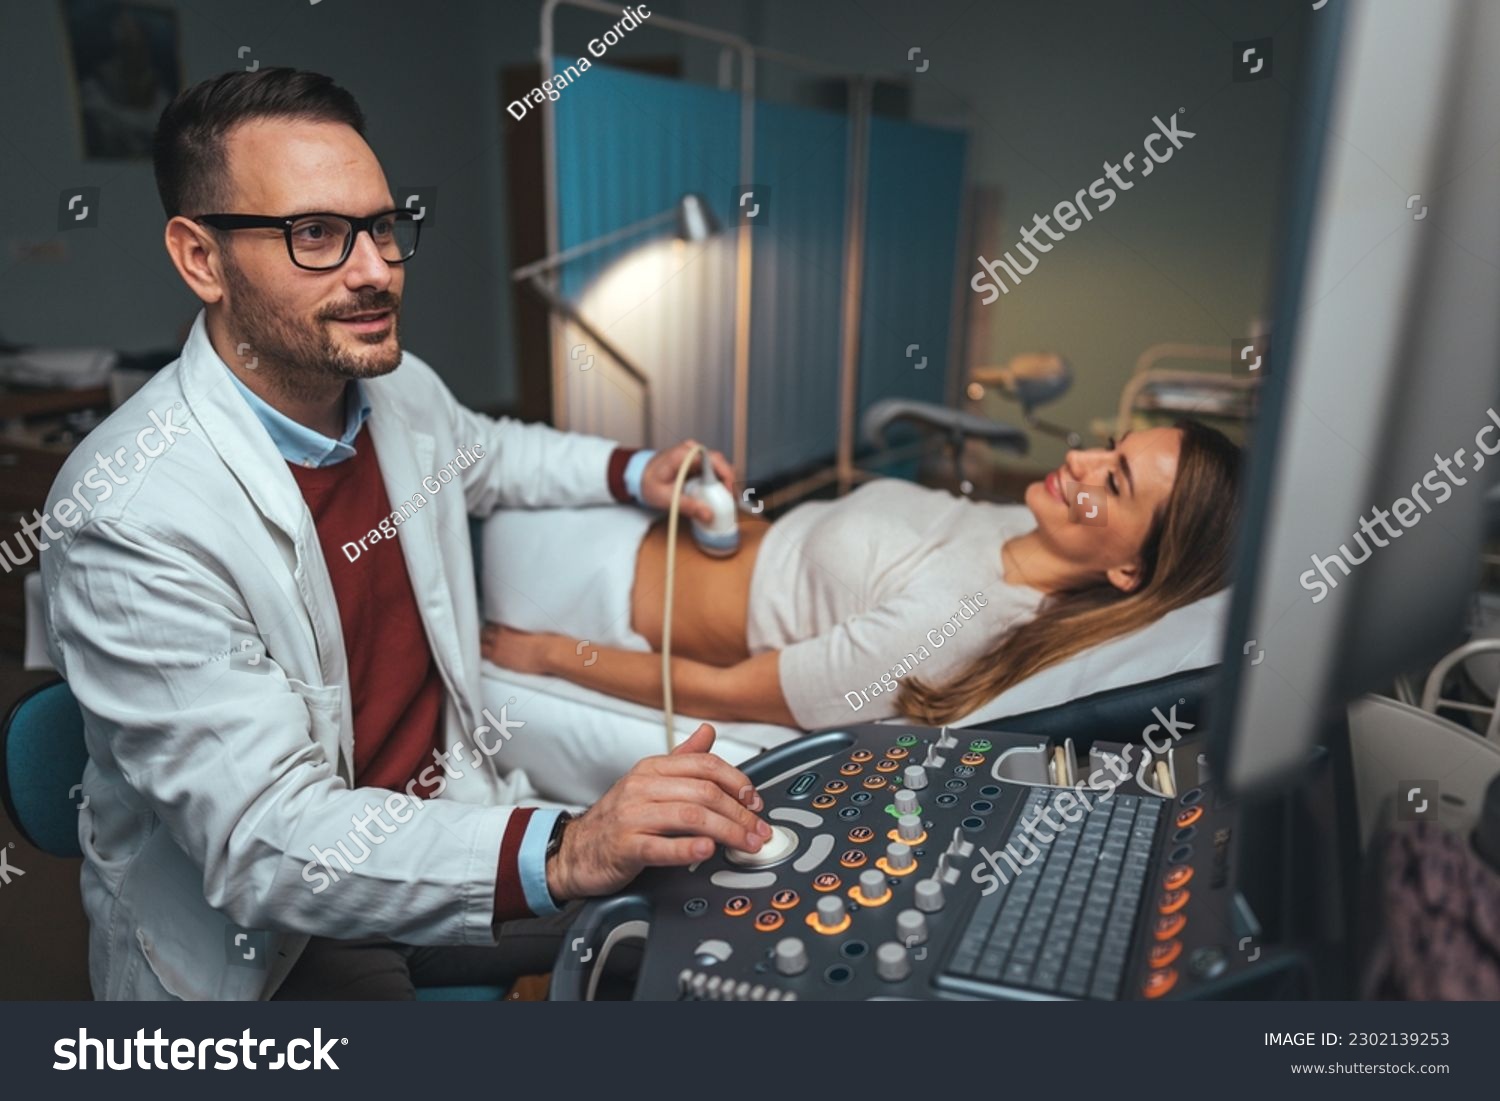 Selective focus on ultrasound scanner device in the hand of a professional doctor examining his patient doing abdominal ultrasound scanning sonogram sonography sonographer early pregnancy #2302139253